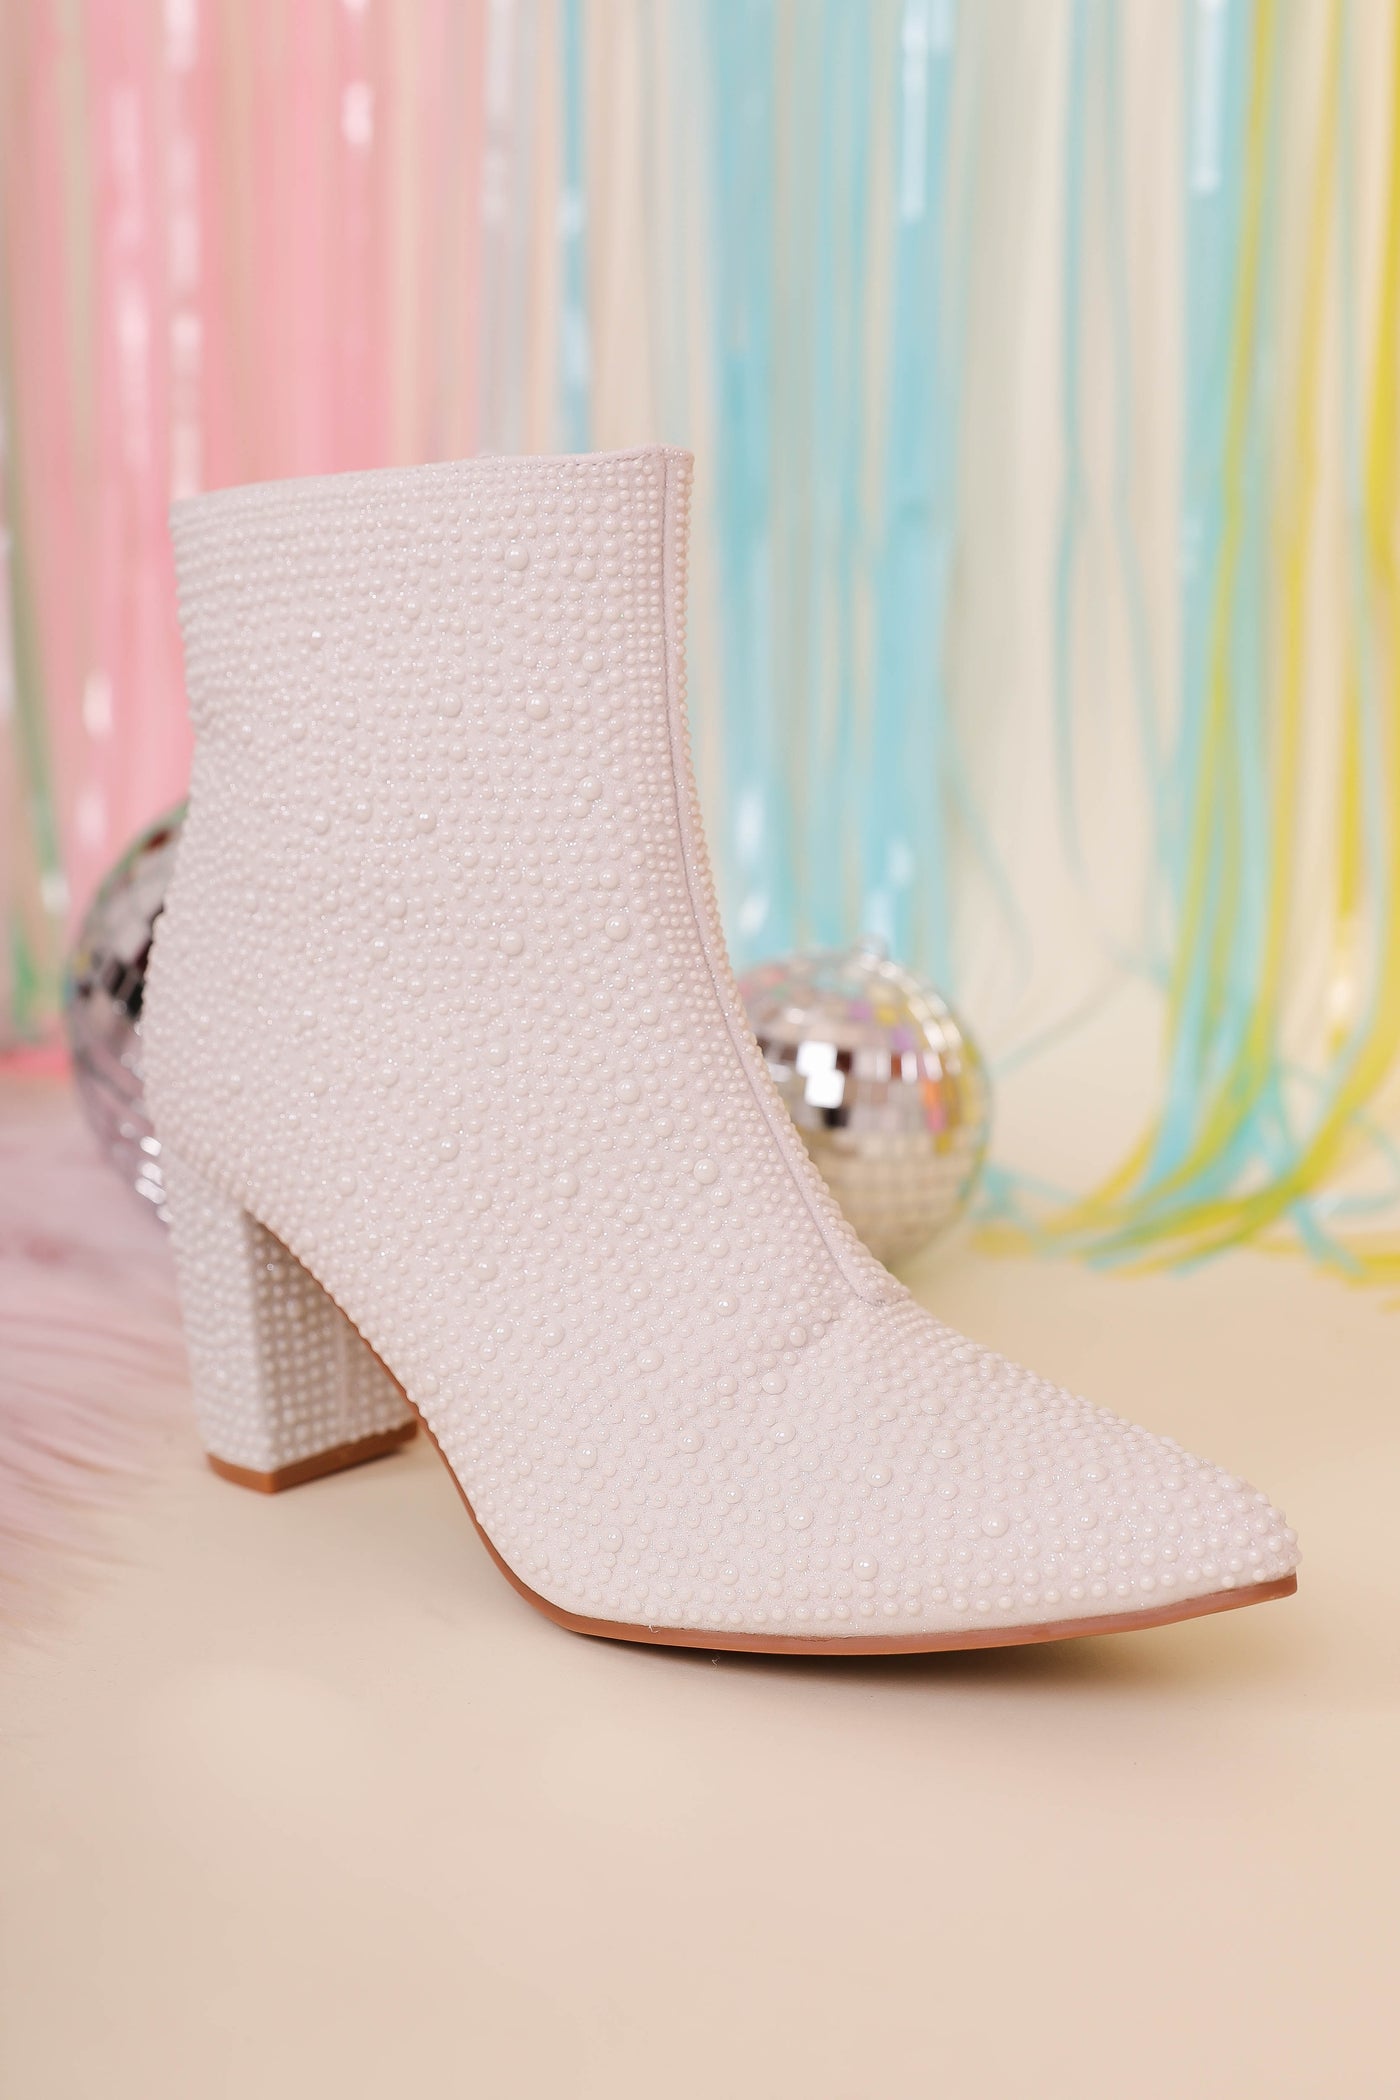 White Pearl Boots- Pearl Booties- White Concert Boots- Iceberg 12 Boots